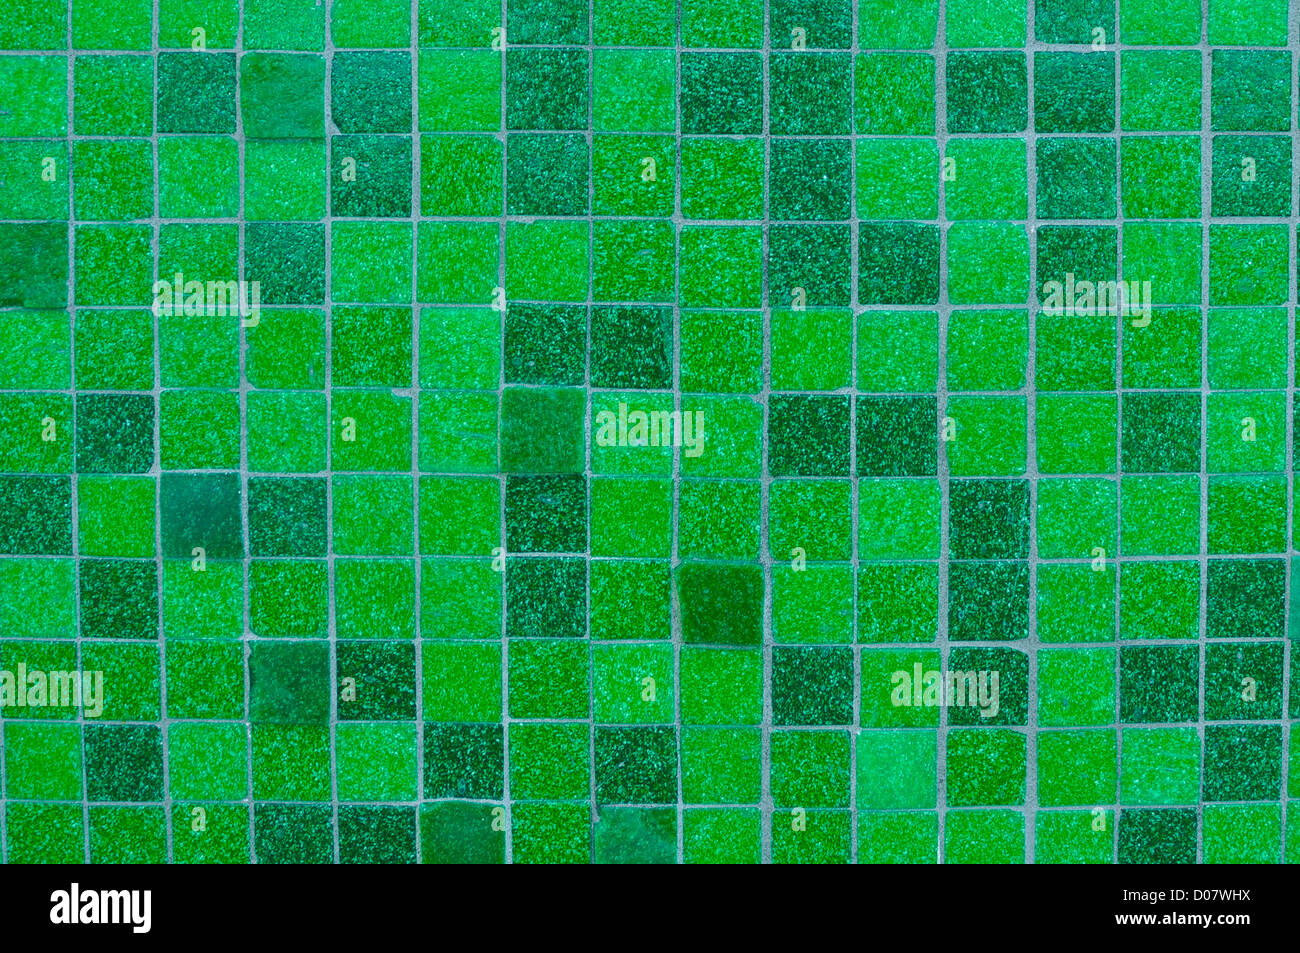 Green Mosaic Tile Background that can have text added Stock Photo